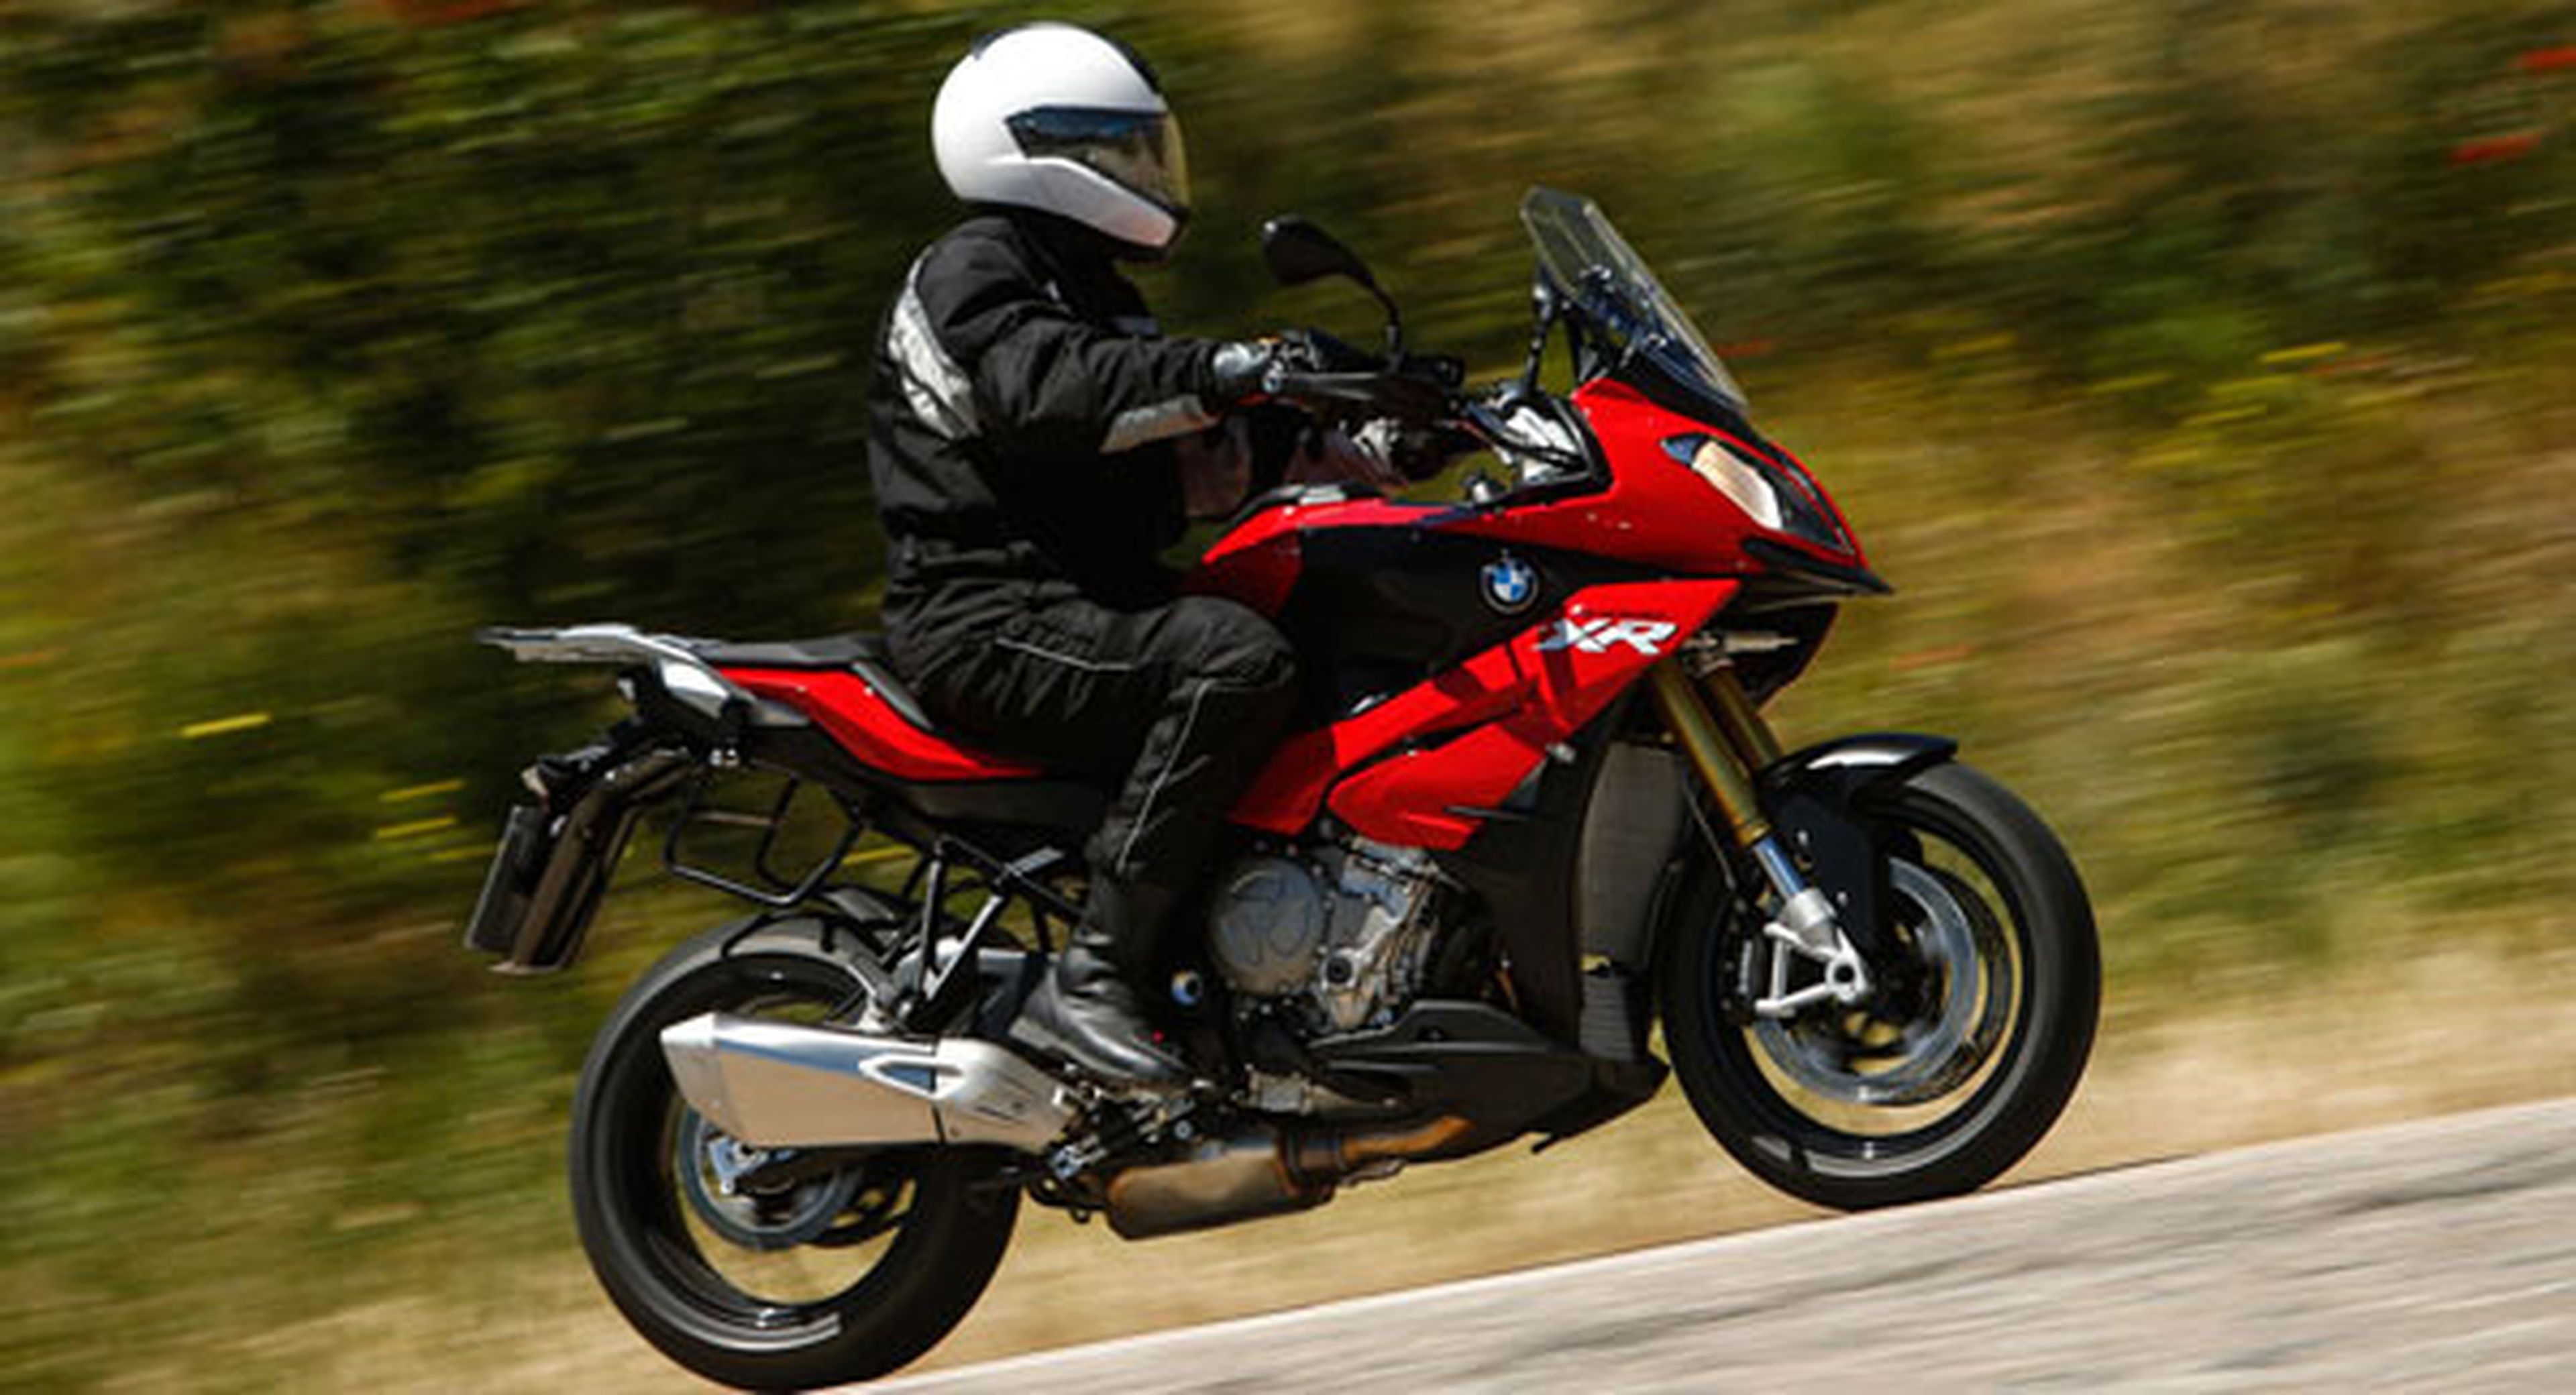 Prueba: BMW S 1000 XR, inacabable